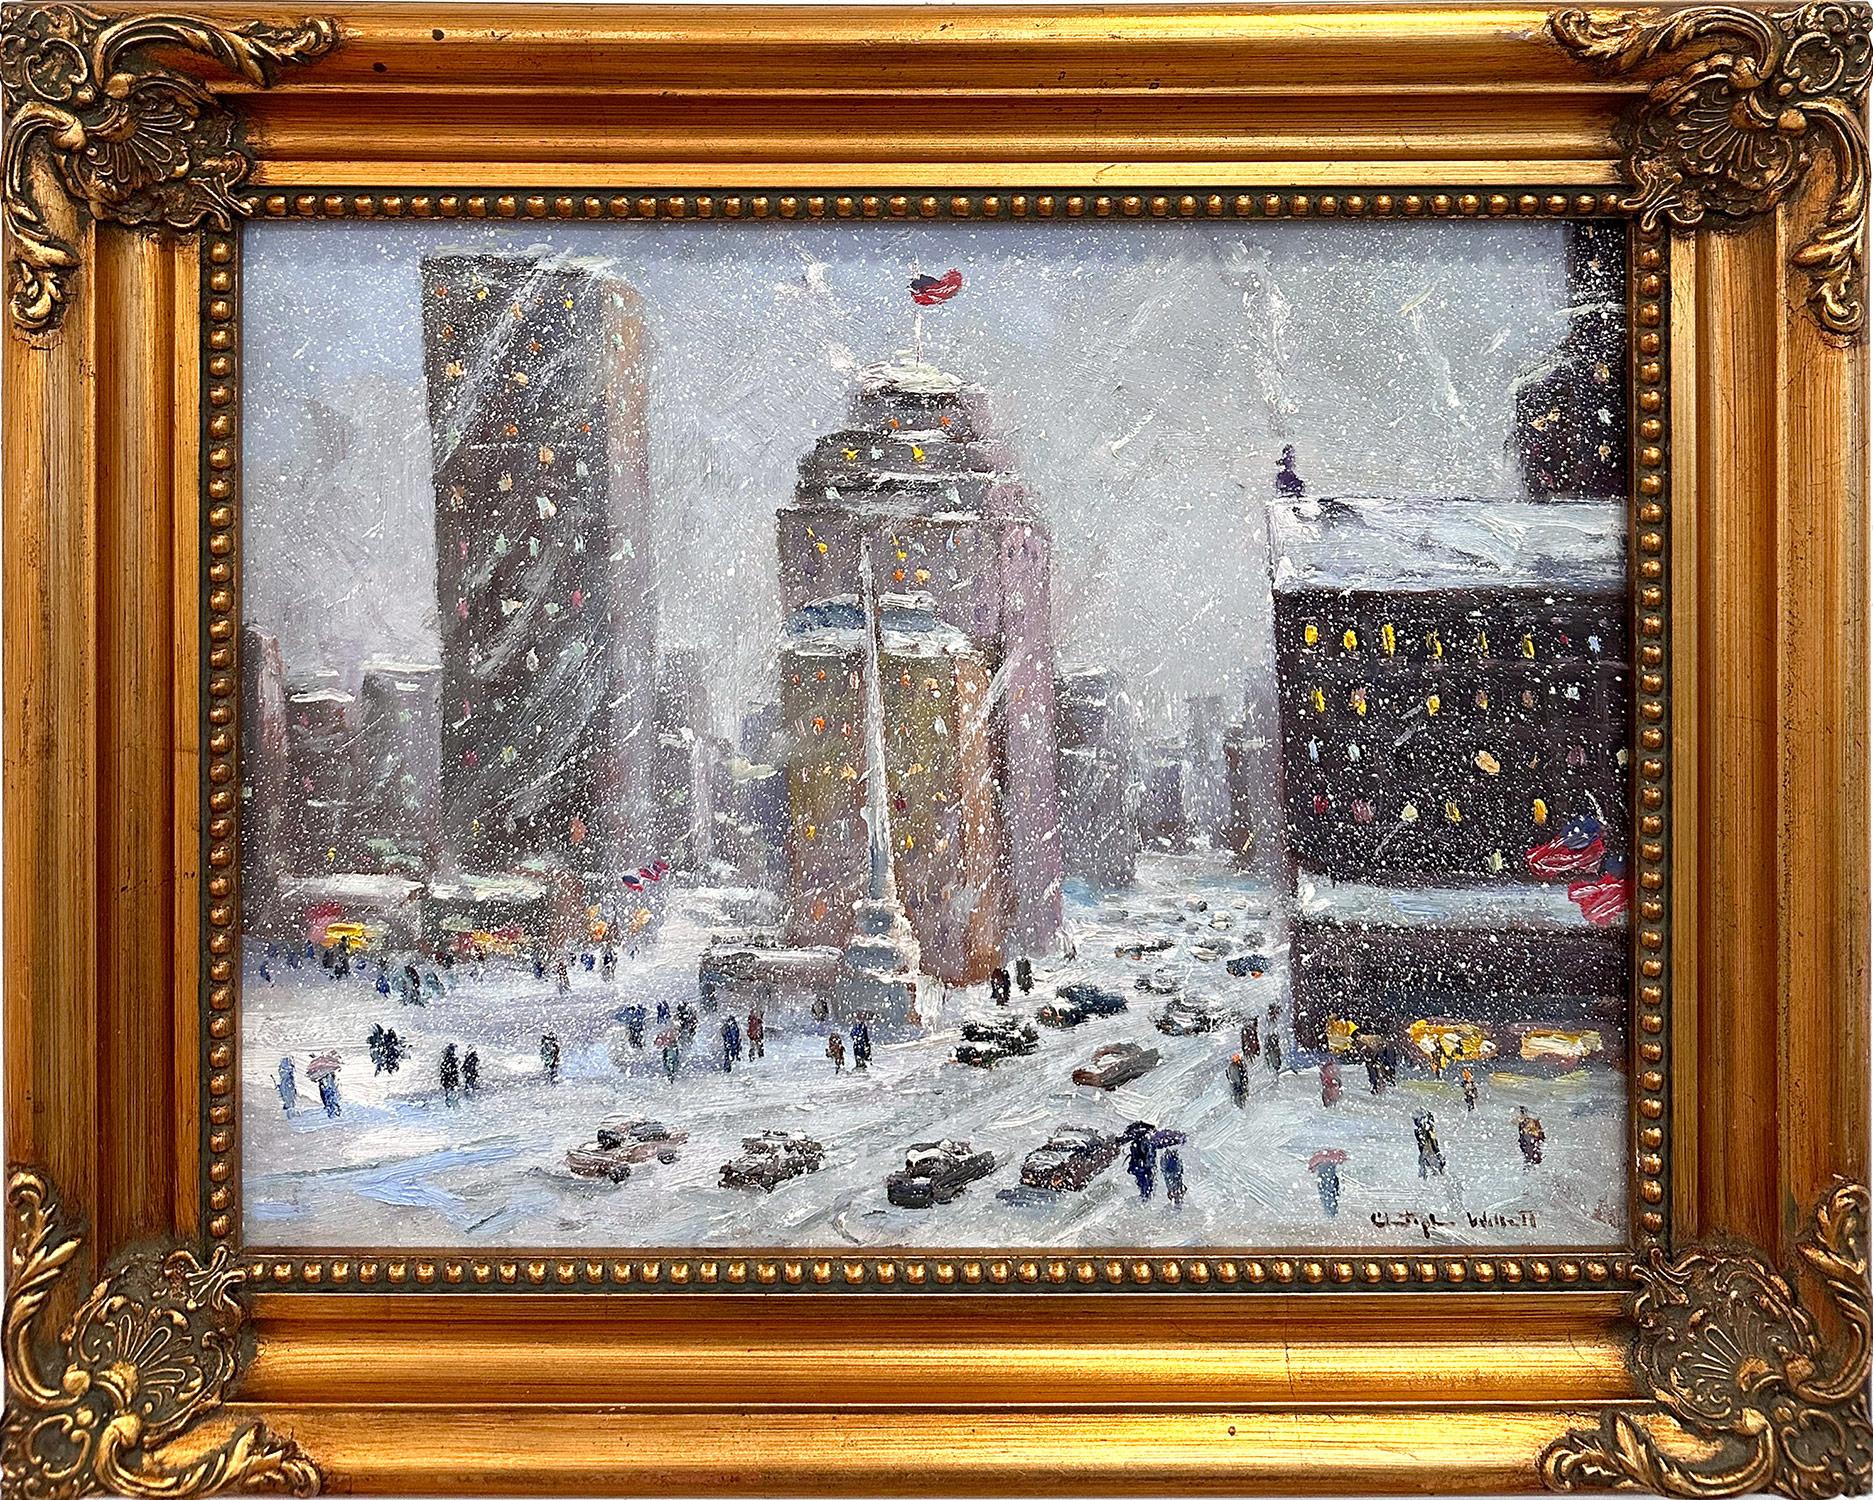 Christopher Willett Landscape Painting - "Columbus Circle New York City" Impressionist Snow Scene Oil Painting on Board